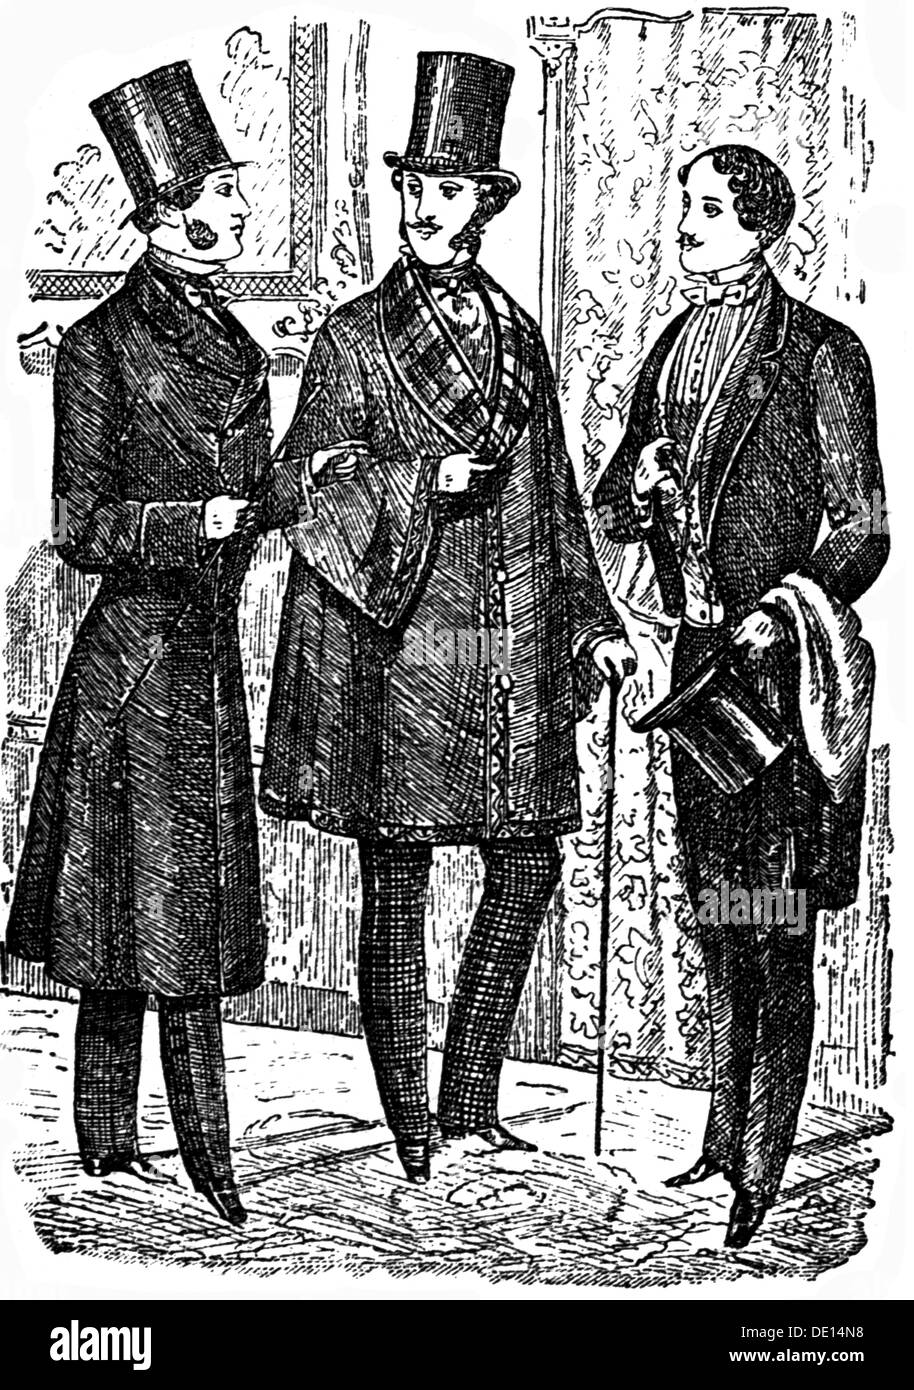 fashion, 19th century, men's fashion, wood engraving, 1854, Additional-Rights-Clearences-Not Available Stock Photo